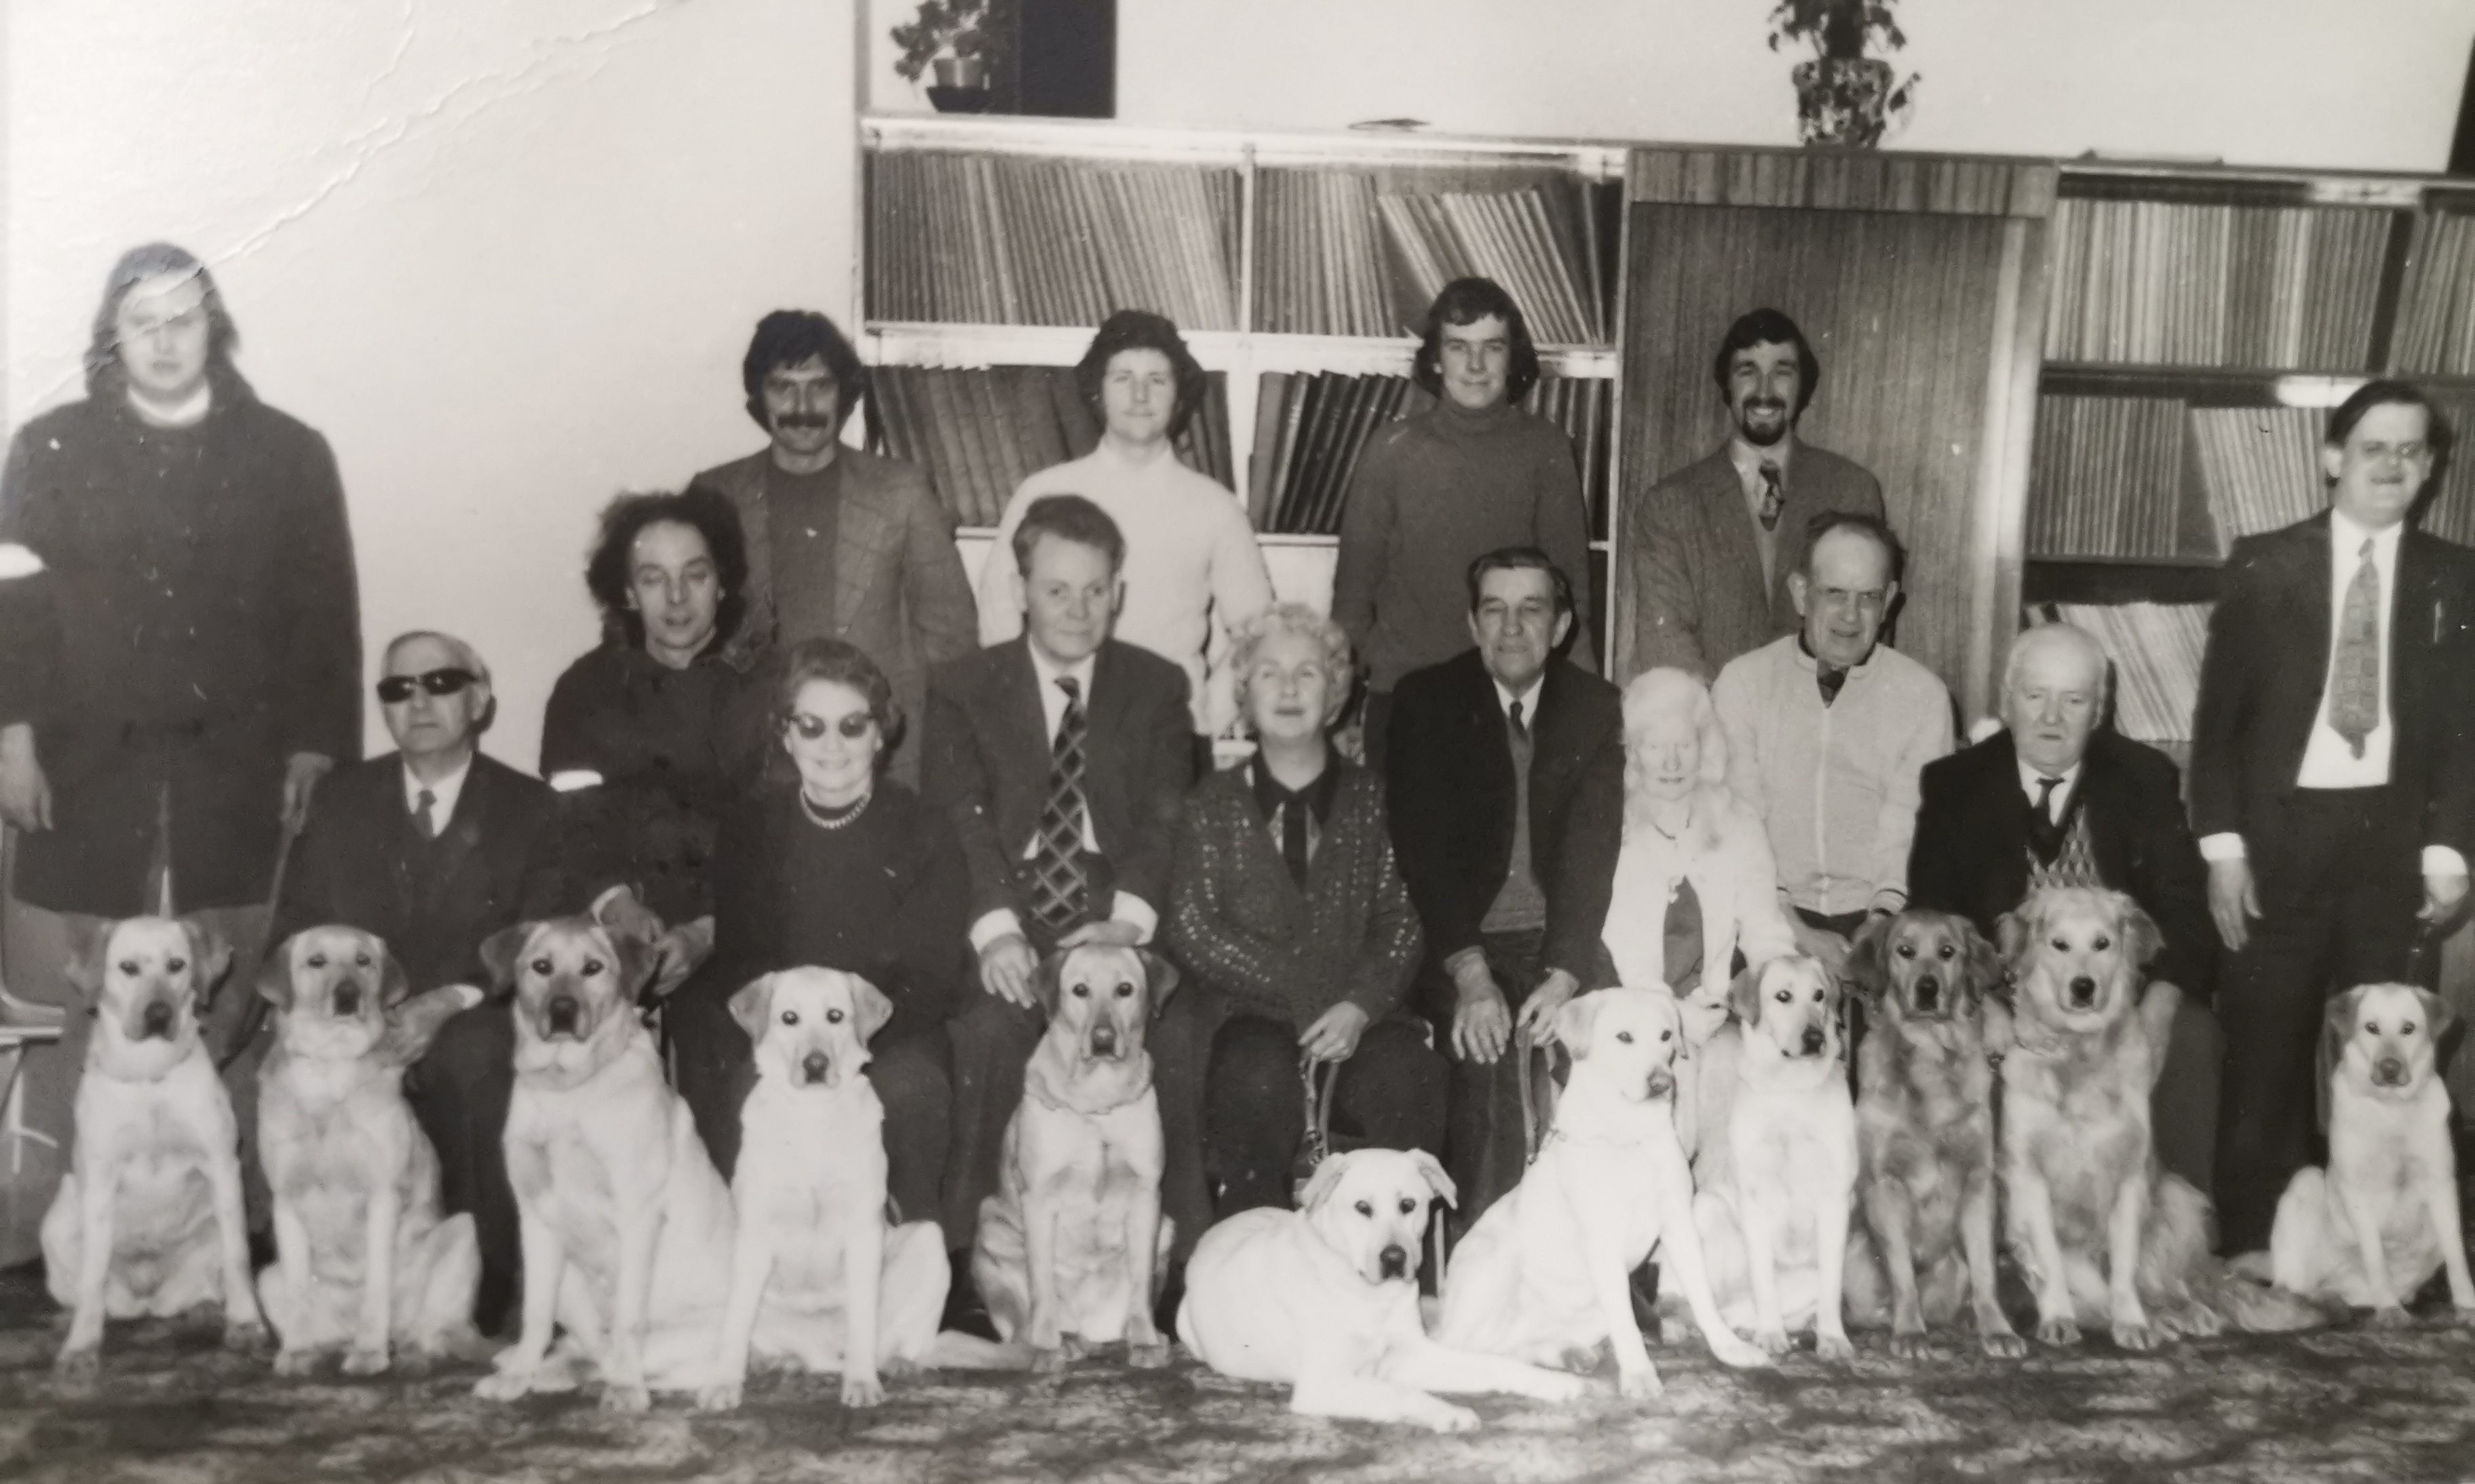 Arthur Grant, one of the first guide dog owners who qualified in Forfar, second from the left, with fellow guide dog owners.